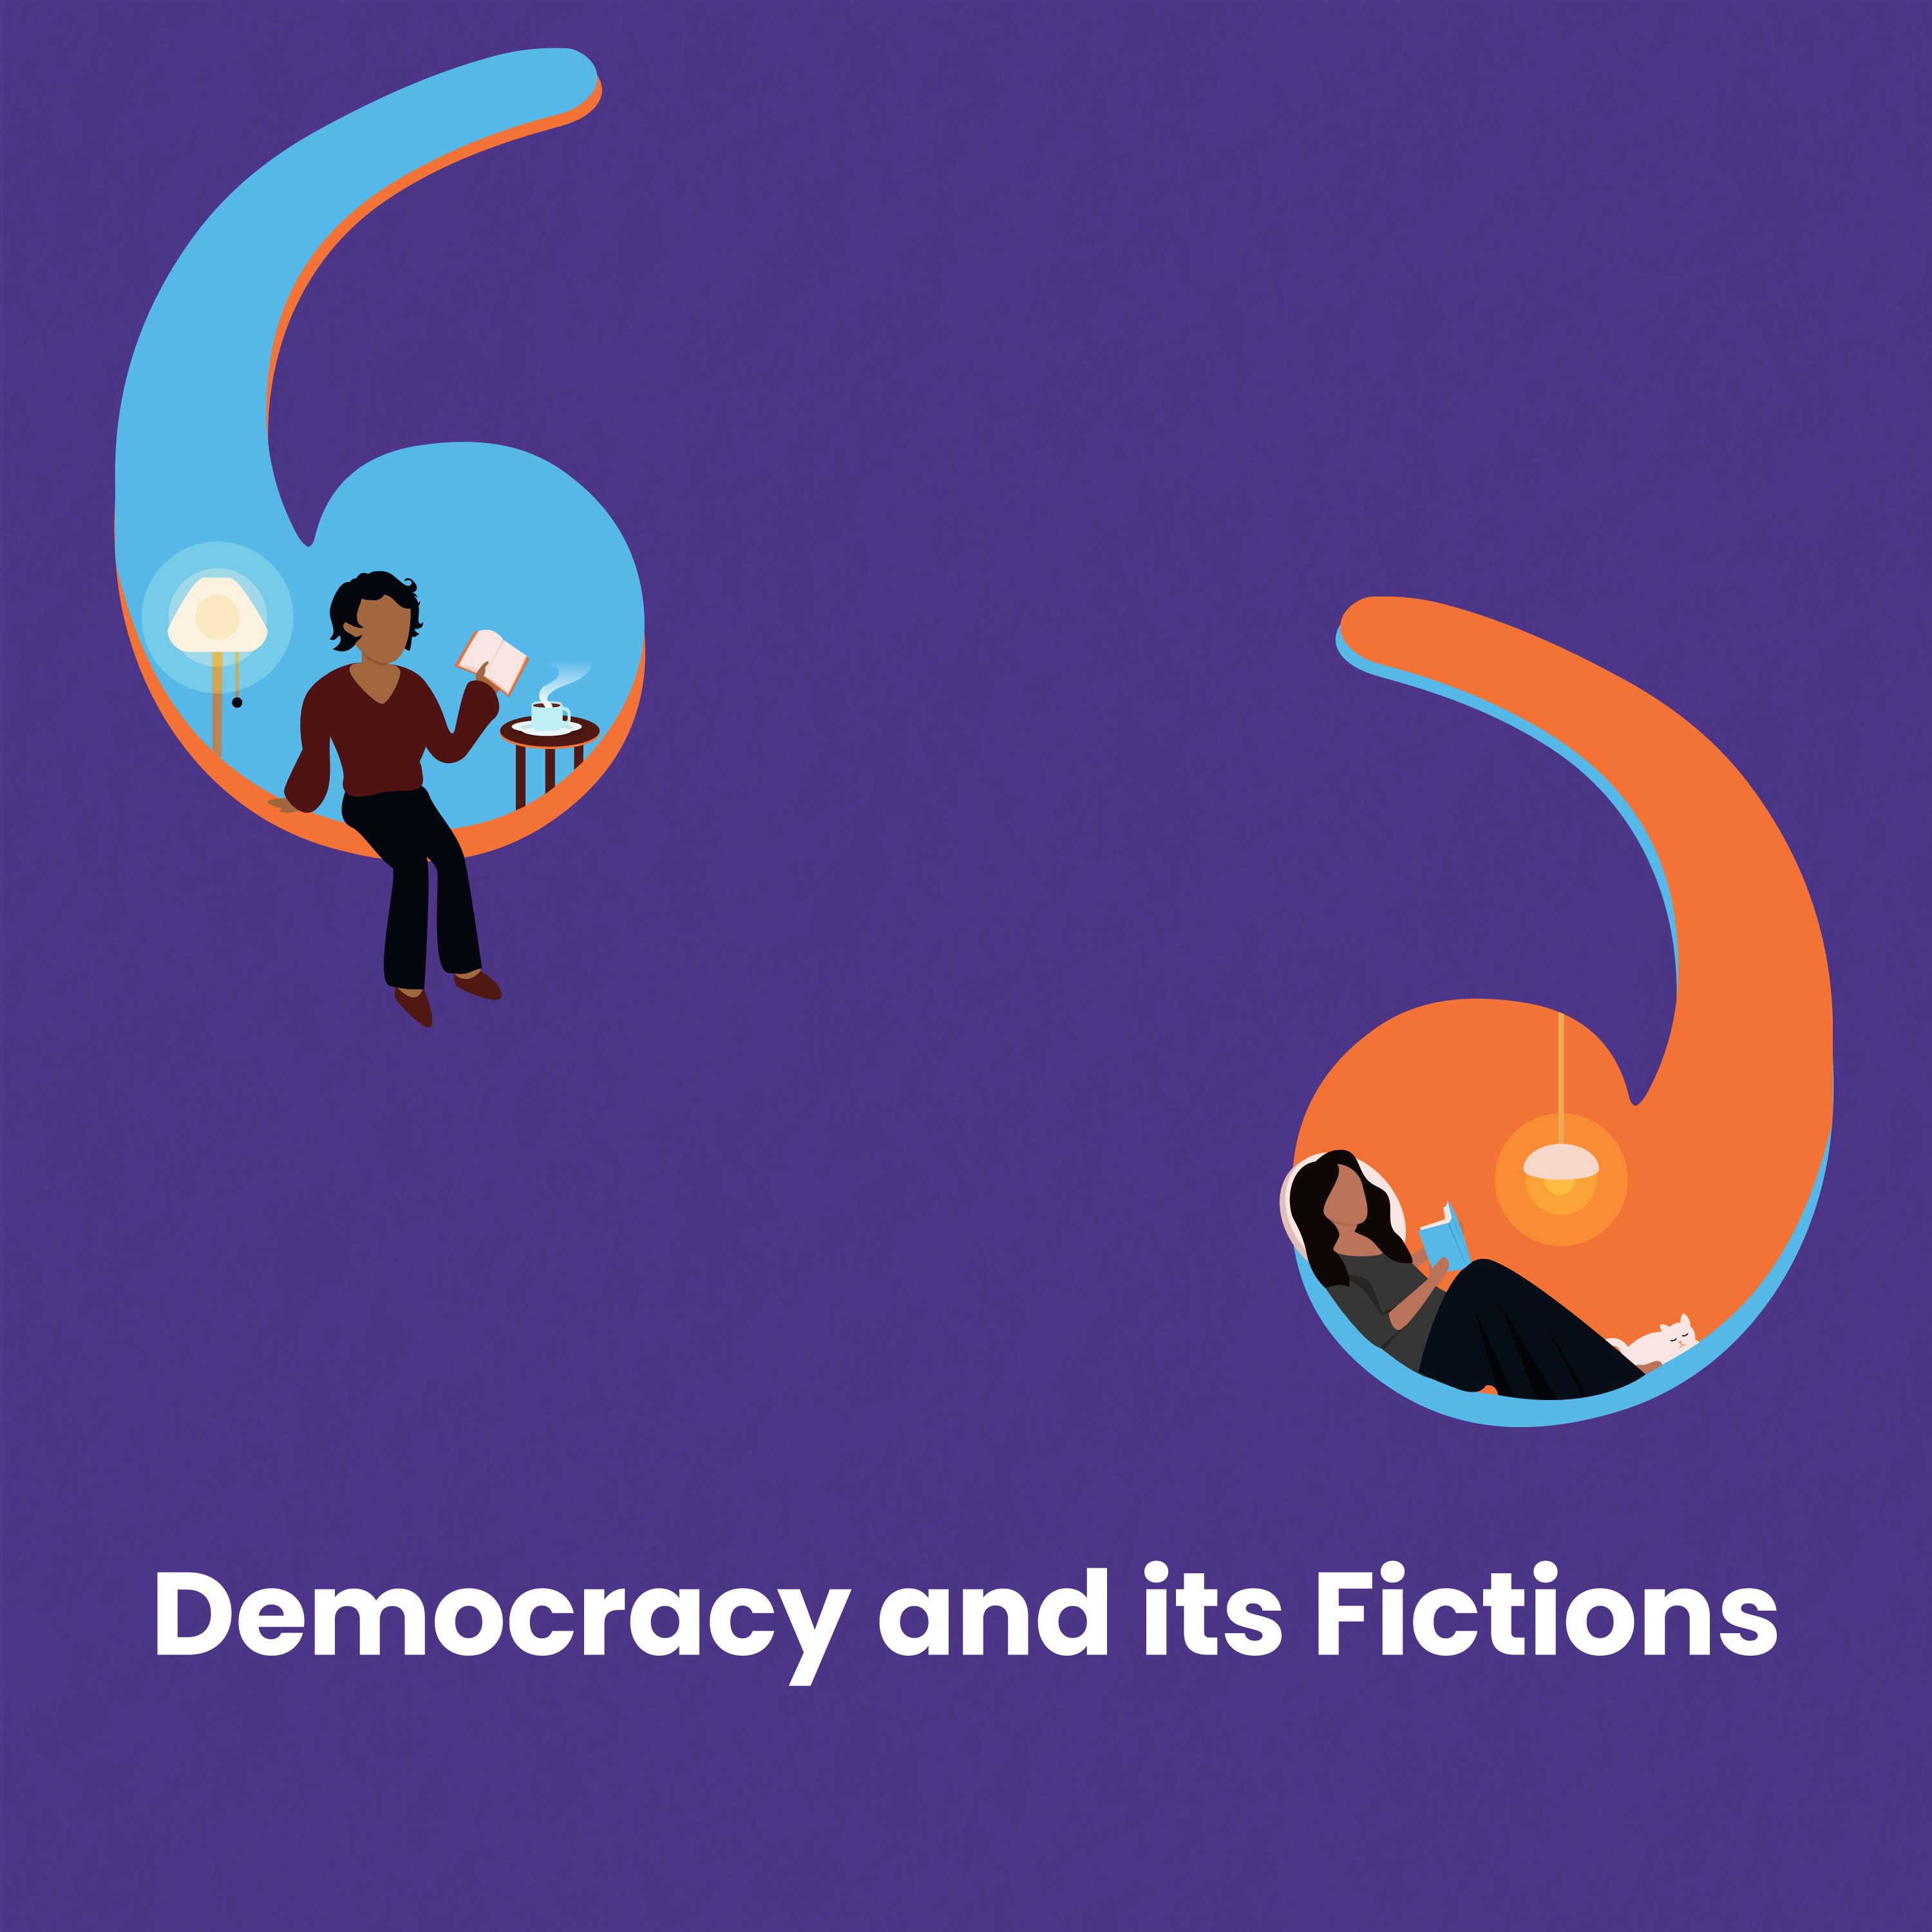 Democracy and its Fictions